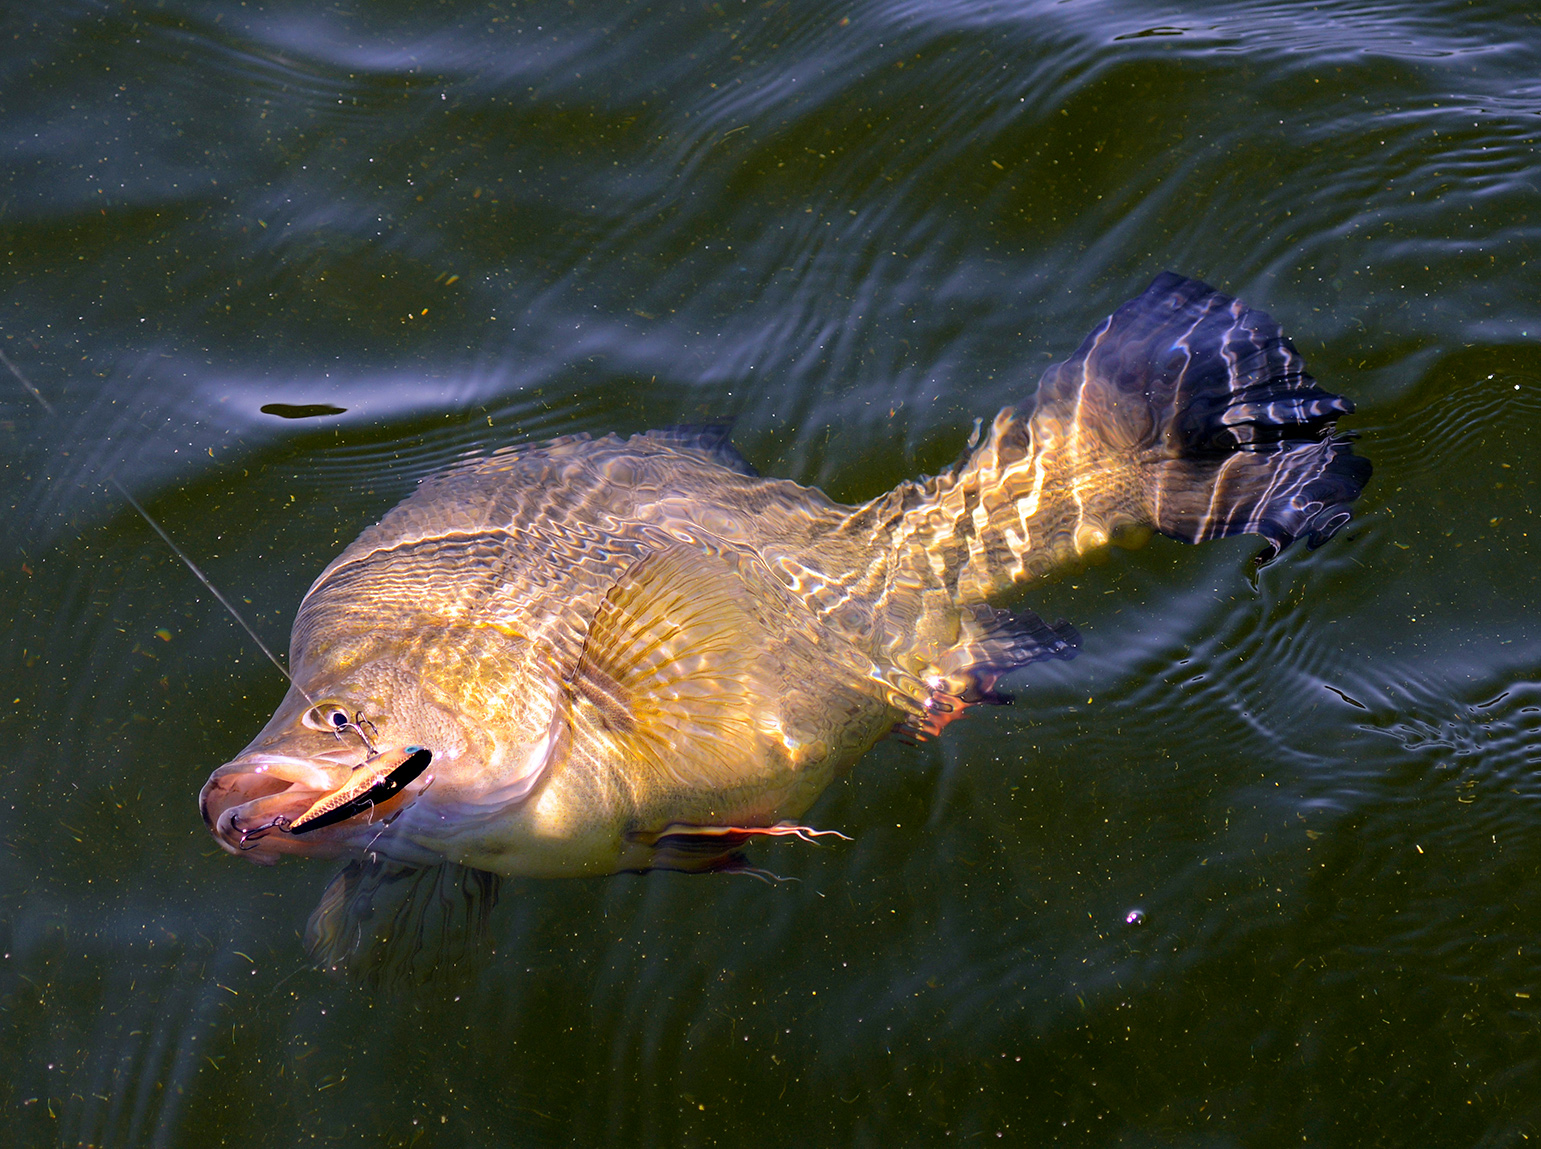 The best fishing for yellowbelly or golden perch at Burrinjuck tends to occur from about the end of September until early December, but some years they also bite well in autumn.